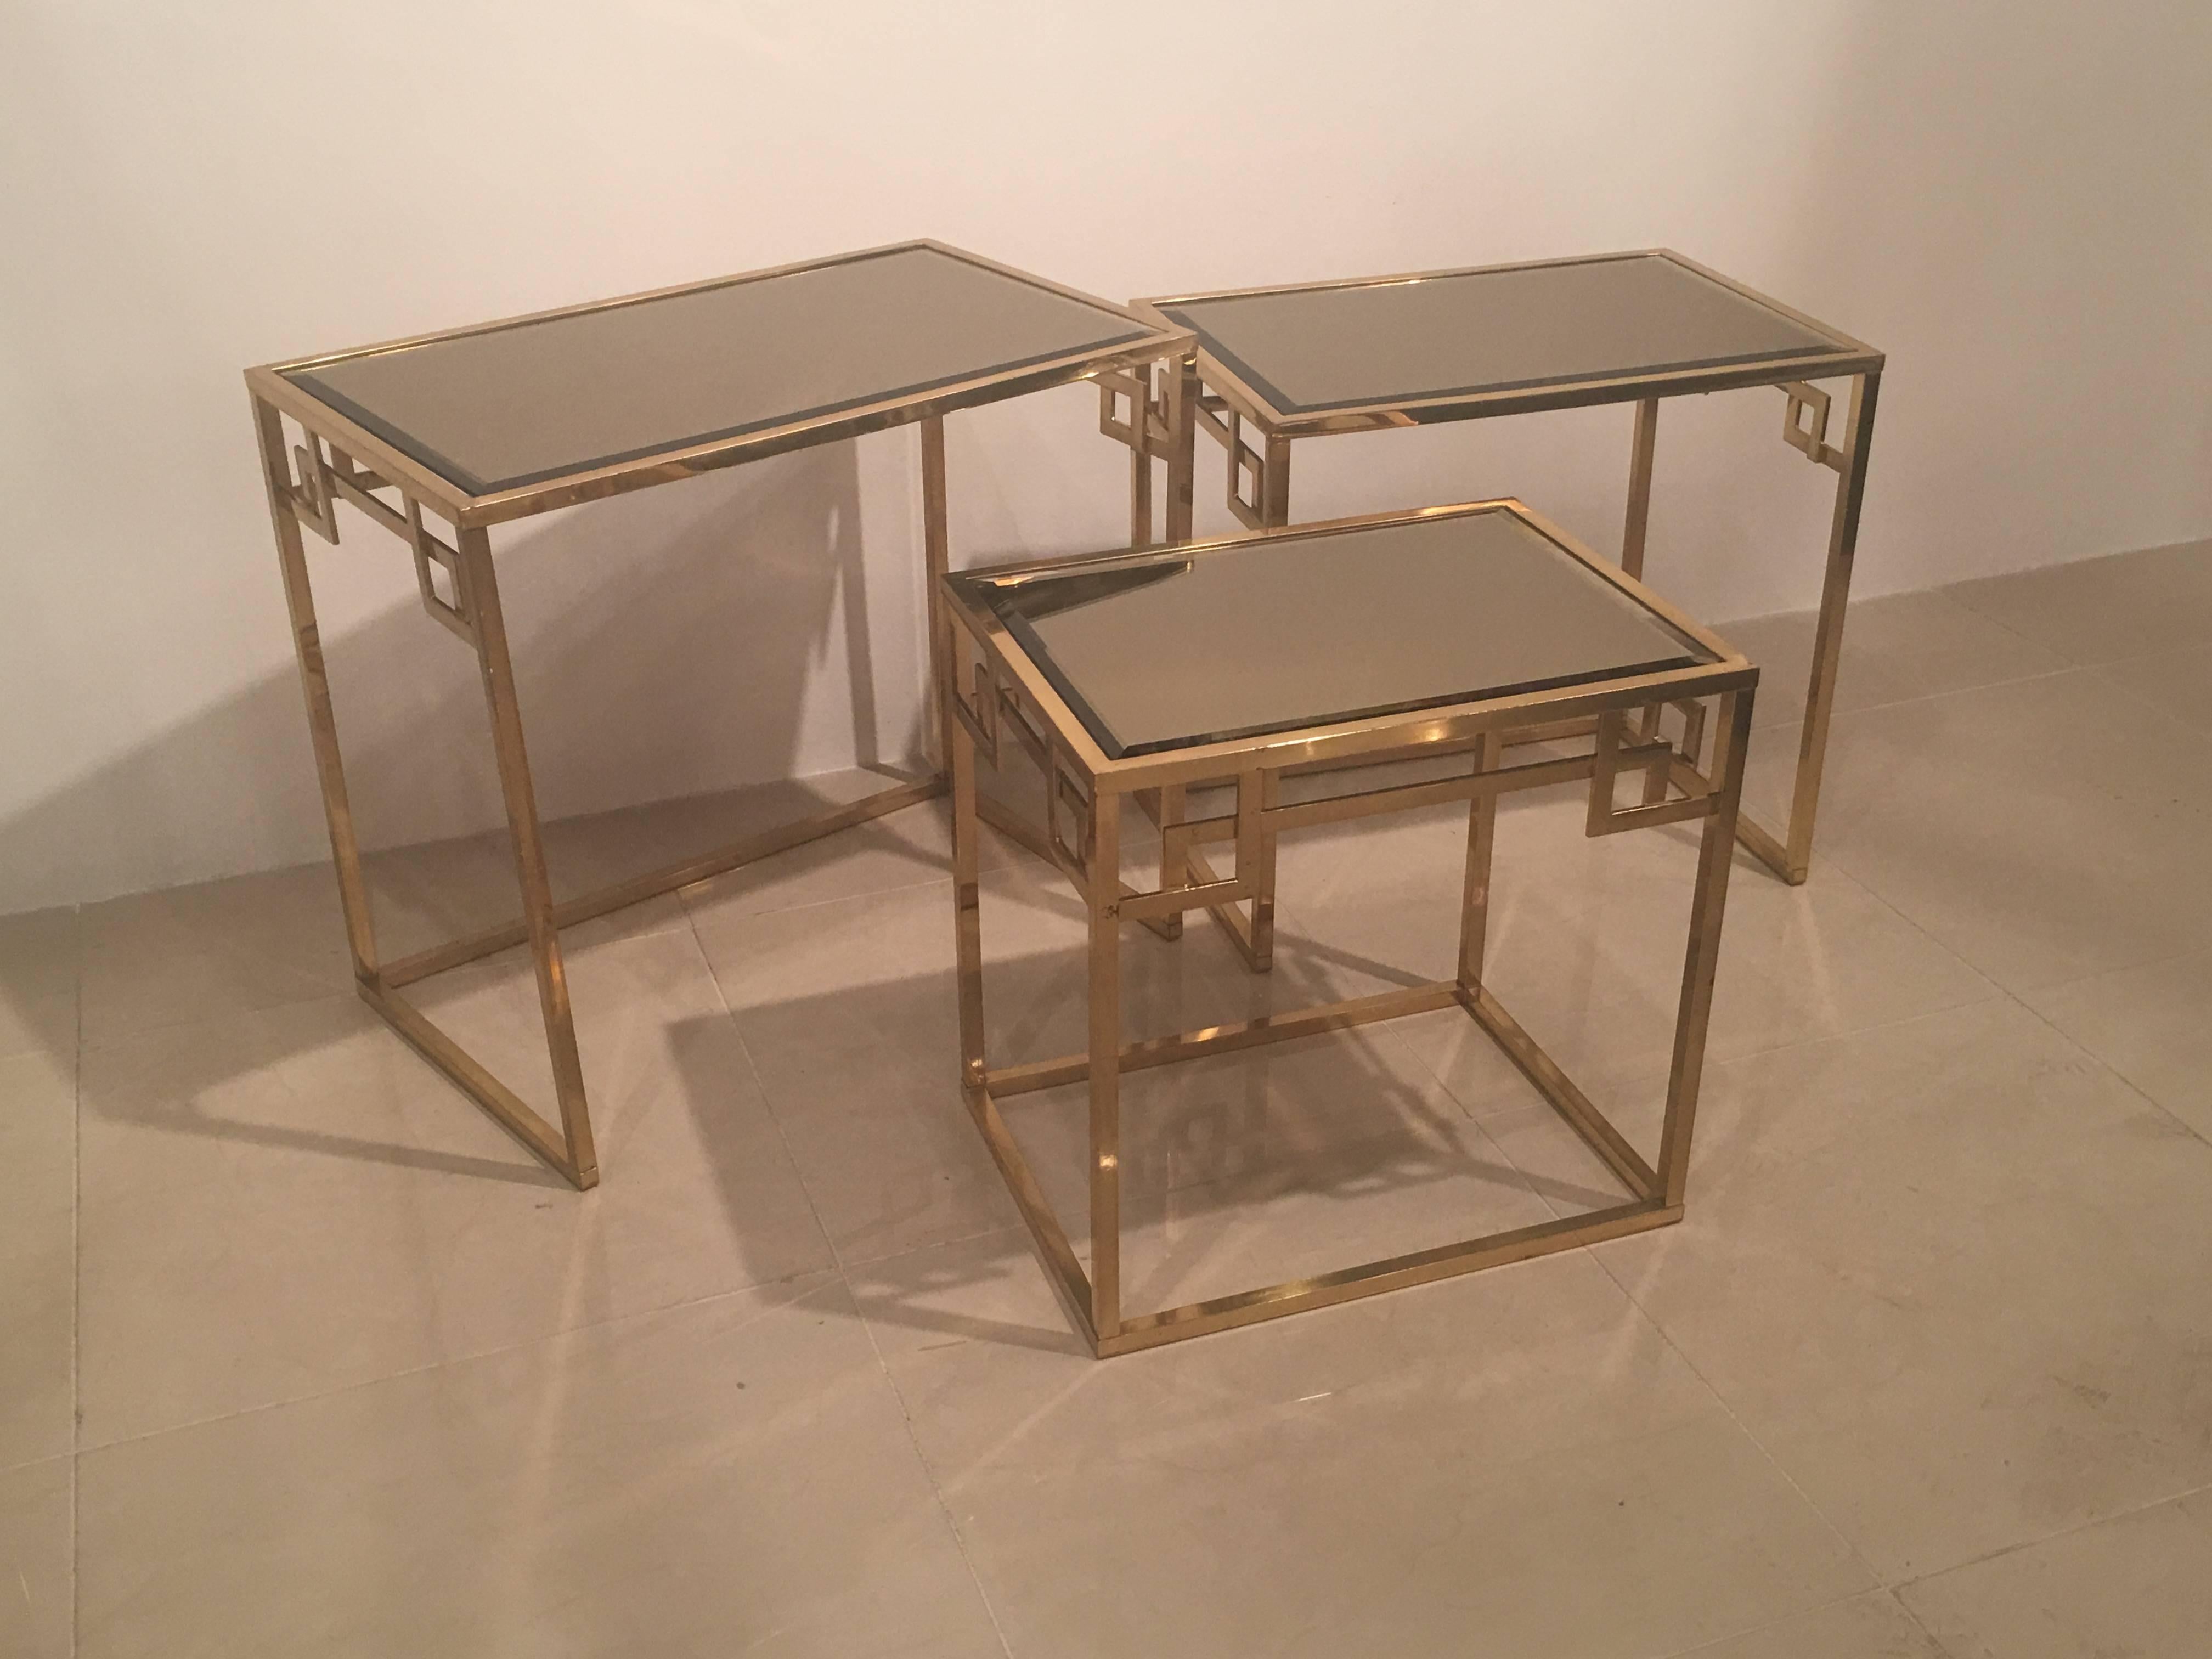 Lovely vintage set of three vintage brass gold Greek key nesting tables in three different sizes. Can be displayed in a few different ways. Made in Italy label underneath. Some patina on brass and glass.
Measures: Small table 17.75 L x 13 D x 17.50